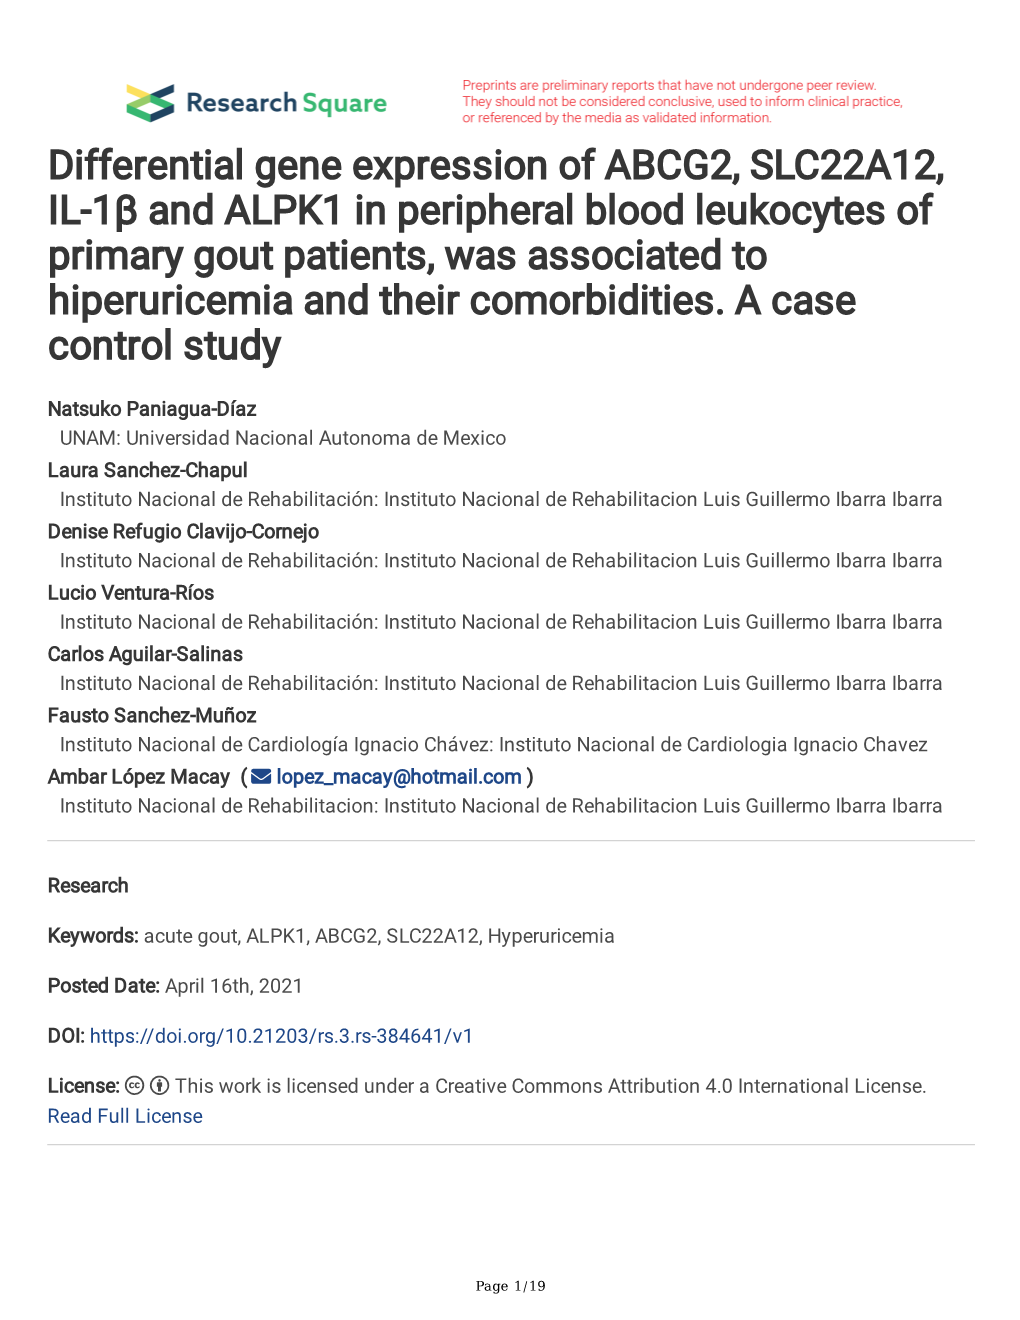 Differential Gene Expression of ABCG2, SLC22A12, IL-1Β And